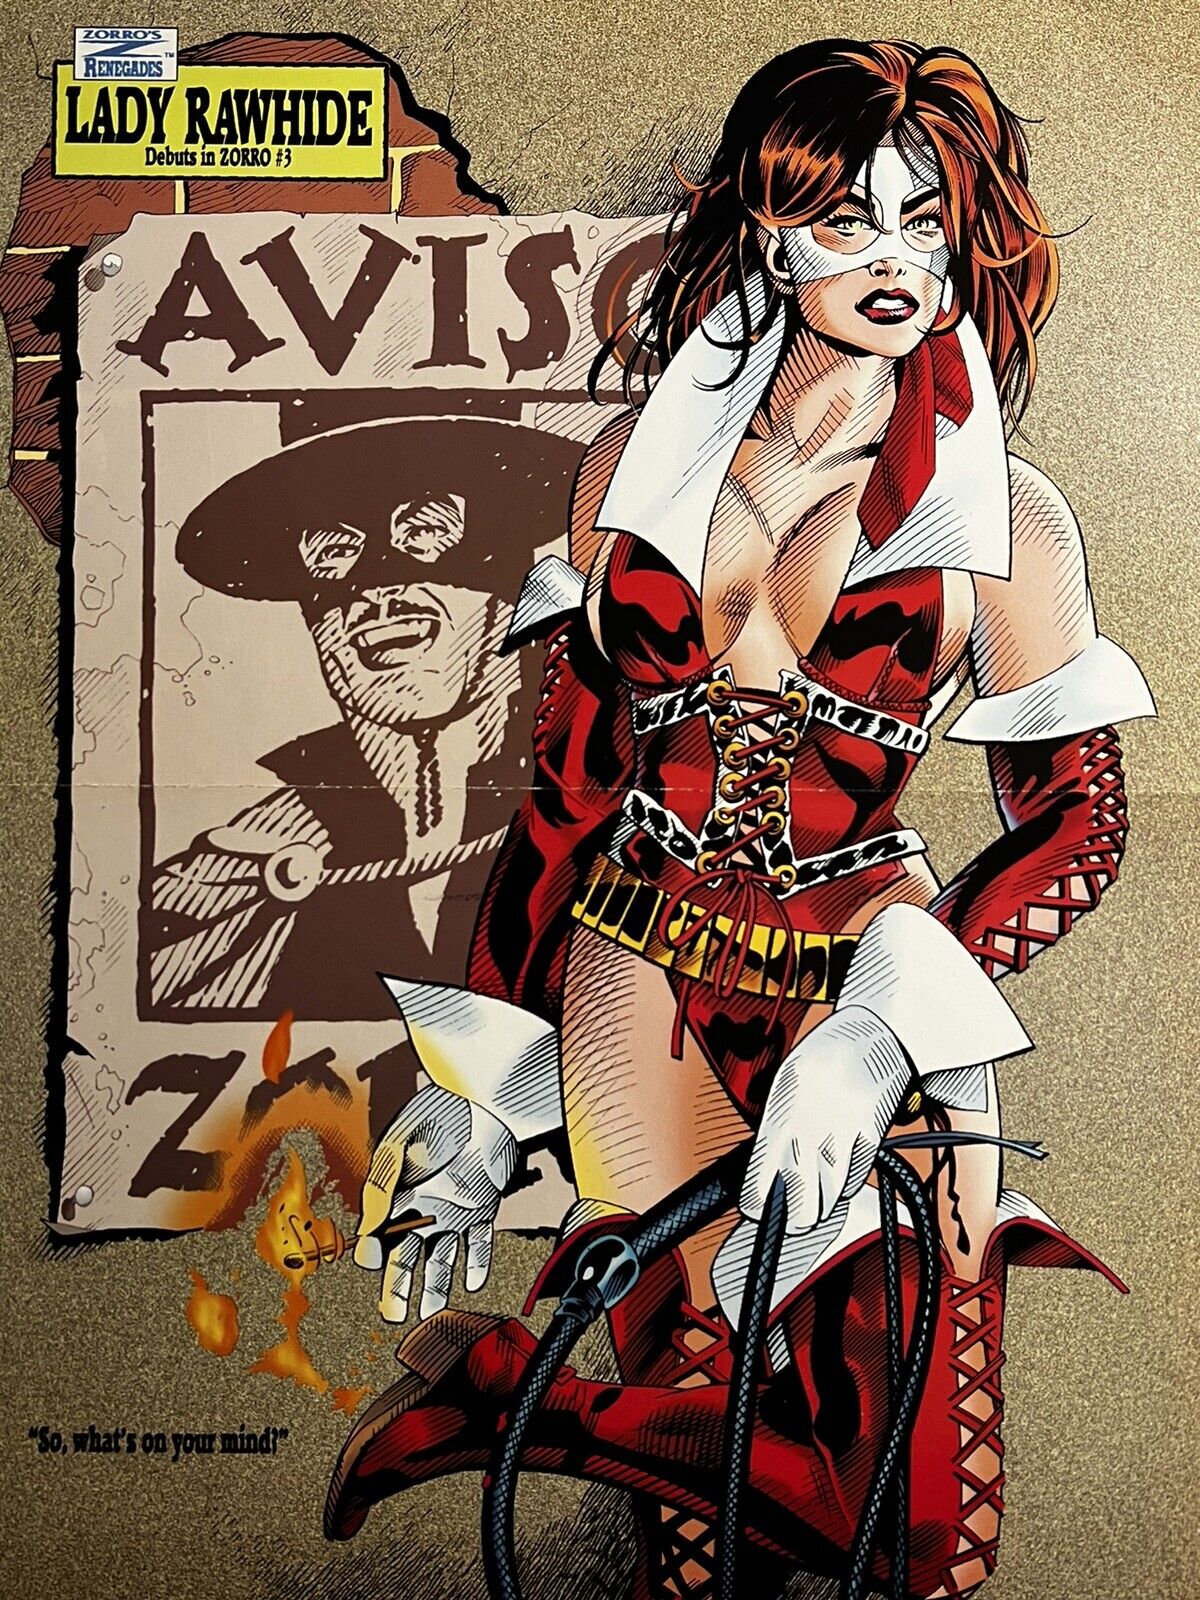 1994 LADY RAWHIDE Debut Poster 25x33cm 1ST APPEARANCE HER02